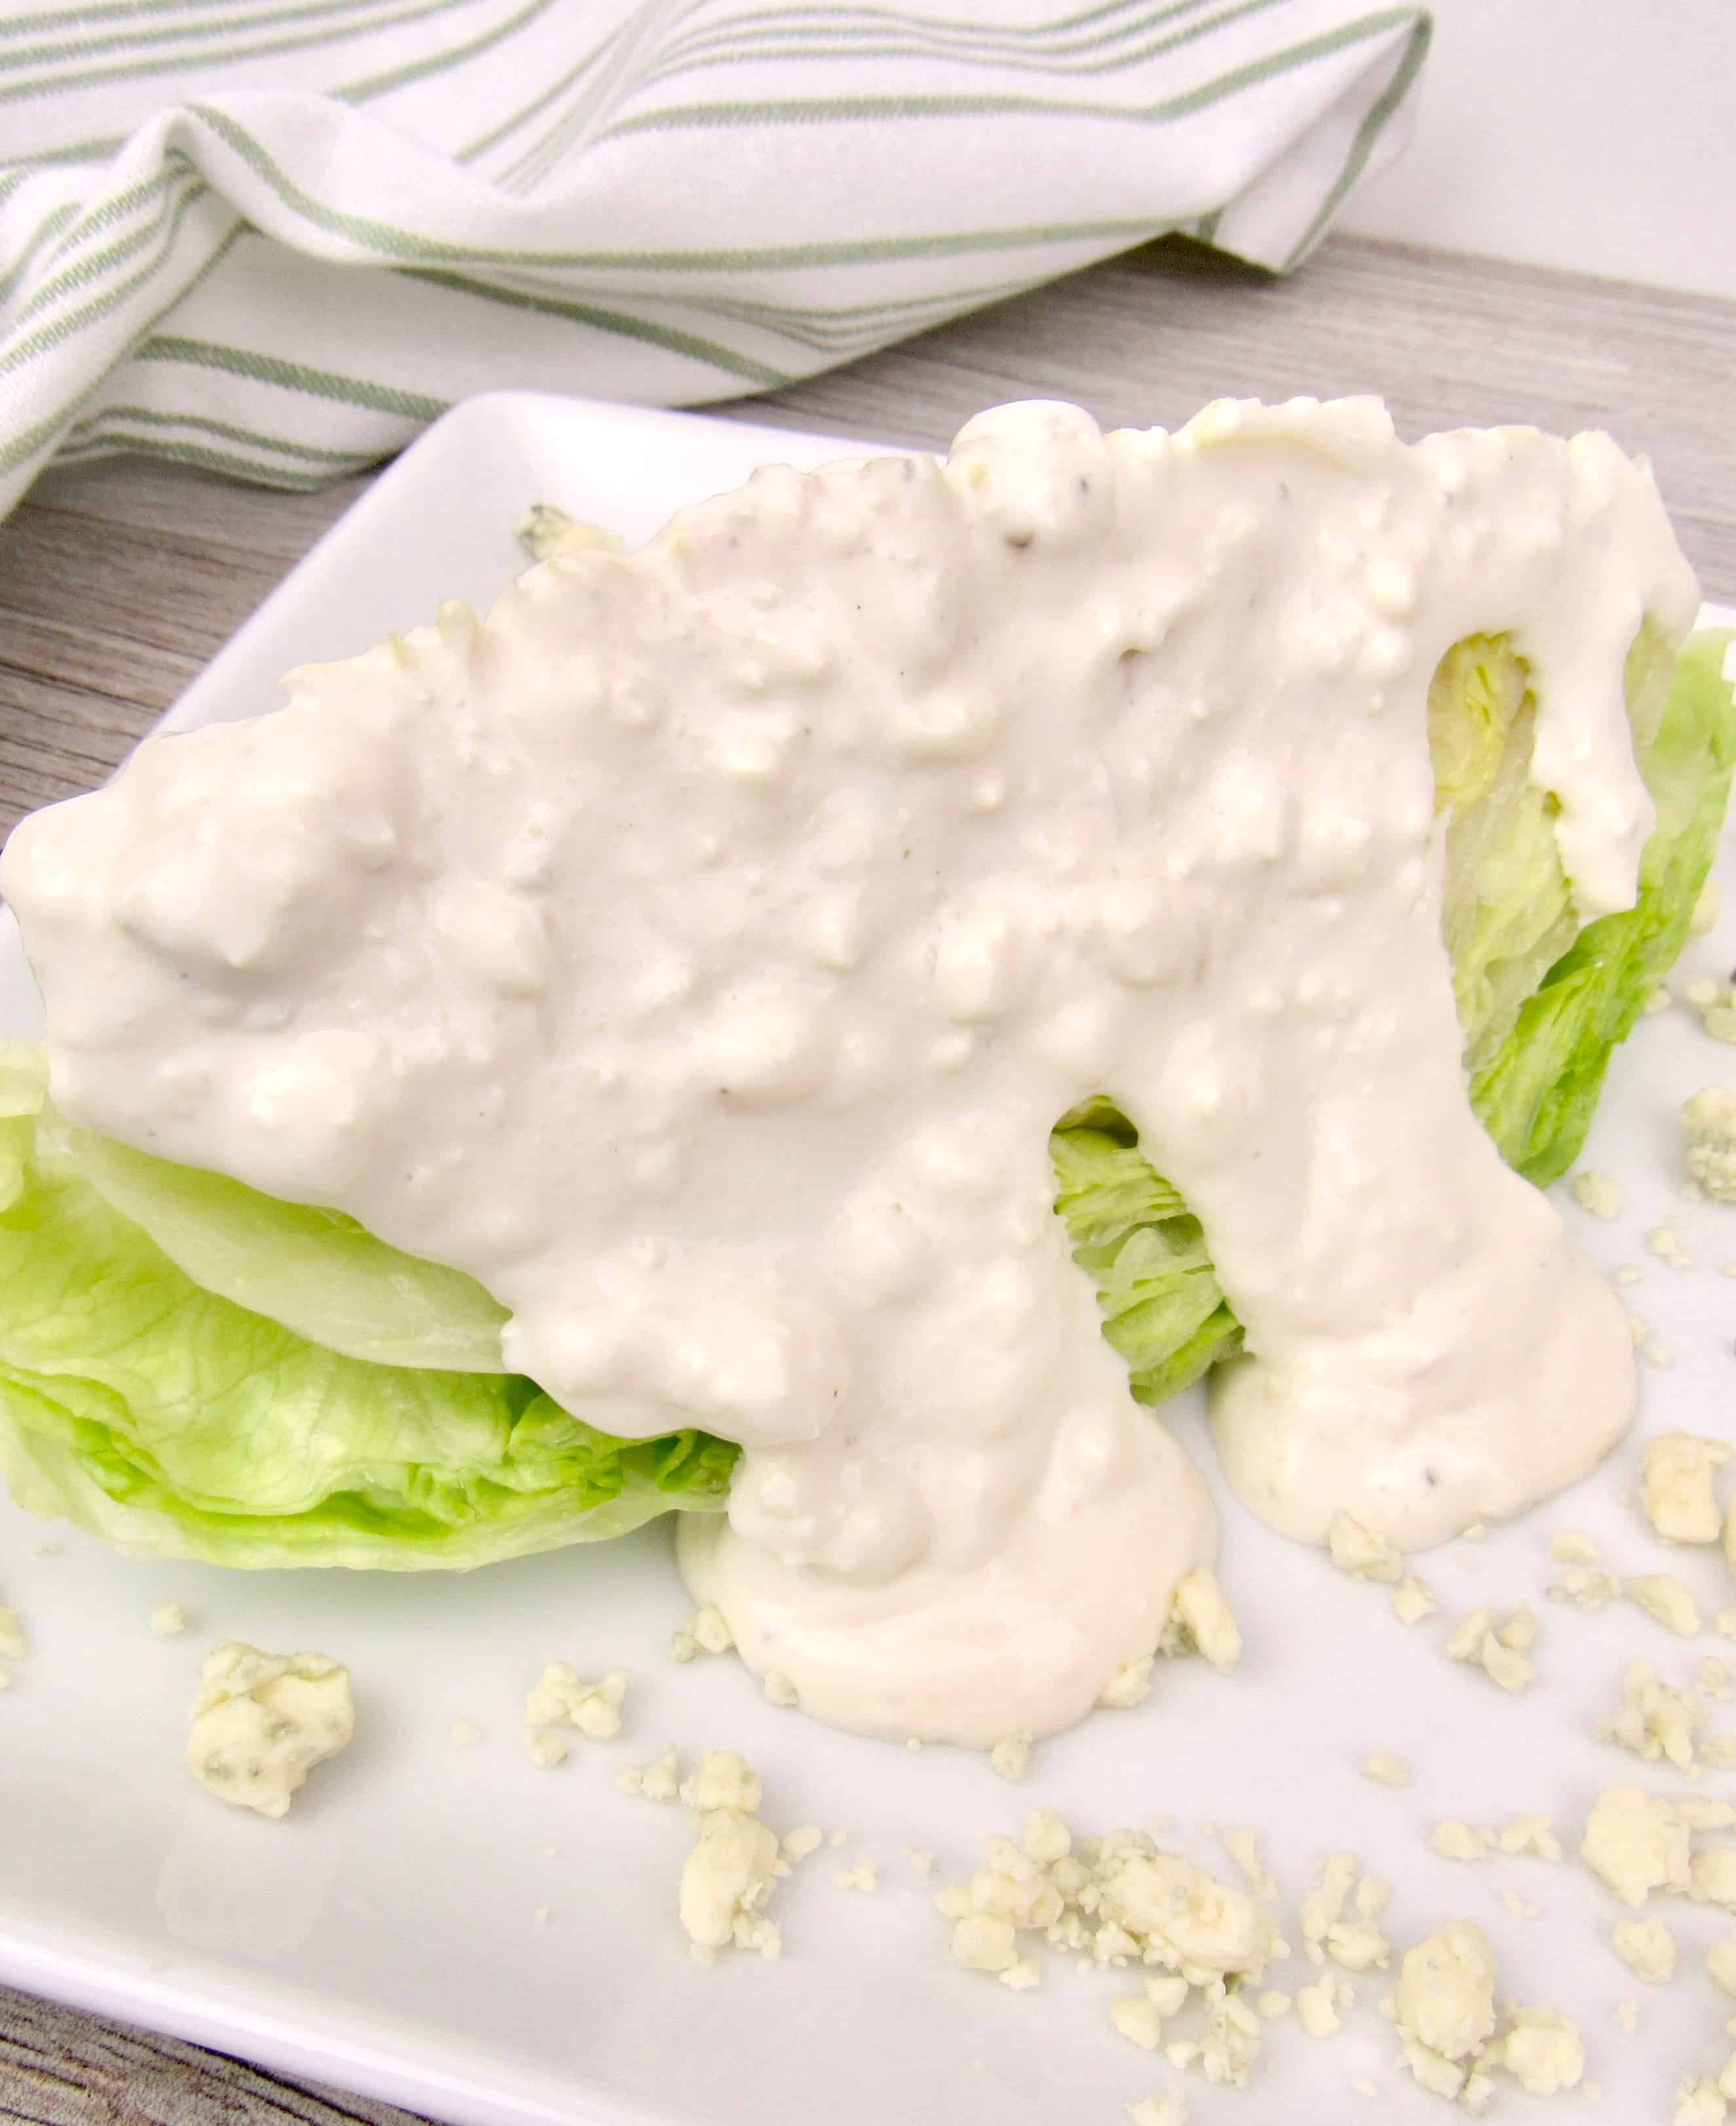 wedge of iceberg lettuce topped with blue cheese dressing